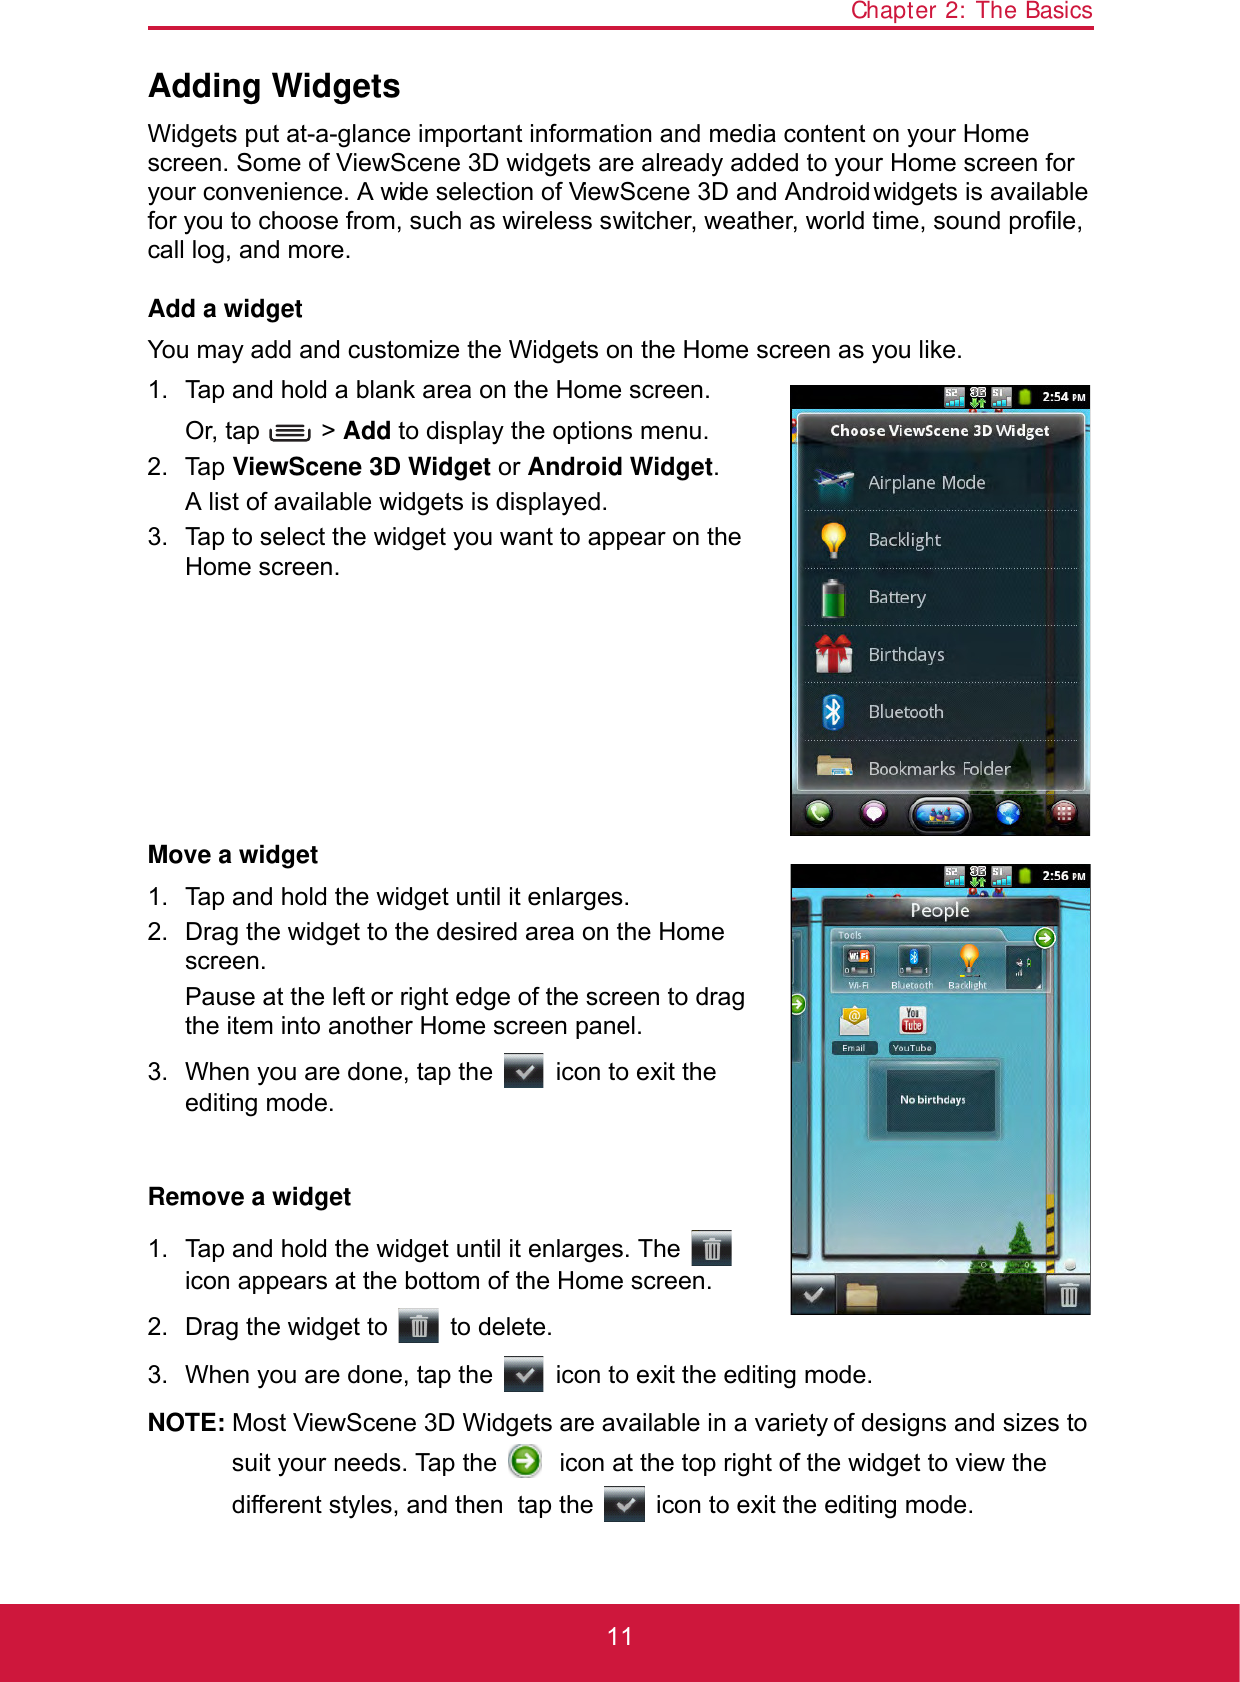 Chapter 2: The Basics11Adding WidgetsWidgets put at-a-glance important information and media content on your Home screen. Some of ViewScene 3D widgets are already added to your Home screen for your convenience. A wide selection of ViewScene 3D and Android widgets is available for you to choose from, such as wireless switcher, weather, world time, sound profile, call log, and more.Add a widgetYou may add and customize the Widgets on the Home screen as you like.1. Tap and hold a blank area on the Home screen.Or, tap   &gt; Add to display the options menu.2. Tap ViewScene 3D Widget or Android Widget.A list of available widgets is displayed. 3. Tap to select the widget you want to appear on the Home screen.Move a widget1. Tap and hold the widget until it enlarges.2. Drag the widget to the desired area on the Home screen.Pause at the left or right edge of the screen to drag the item into another Home screen panel.3. When you are done, tap the   icon to exit the editing mode.Remove a widget1. Tap and hold the widget until it enlarges. The   icon appears at the bottom of the Home screen.2. Drag the widget to   to delete.3. When you are done, tap the   icon to exit the editing mode.NOTE: Most ViewScene 3D Widgets are available in a variety of designs and sizes to suit your needs. Tap the   icon at the top right of the widget to view the different styles, and then  tap the   icon to exit the editing mode.